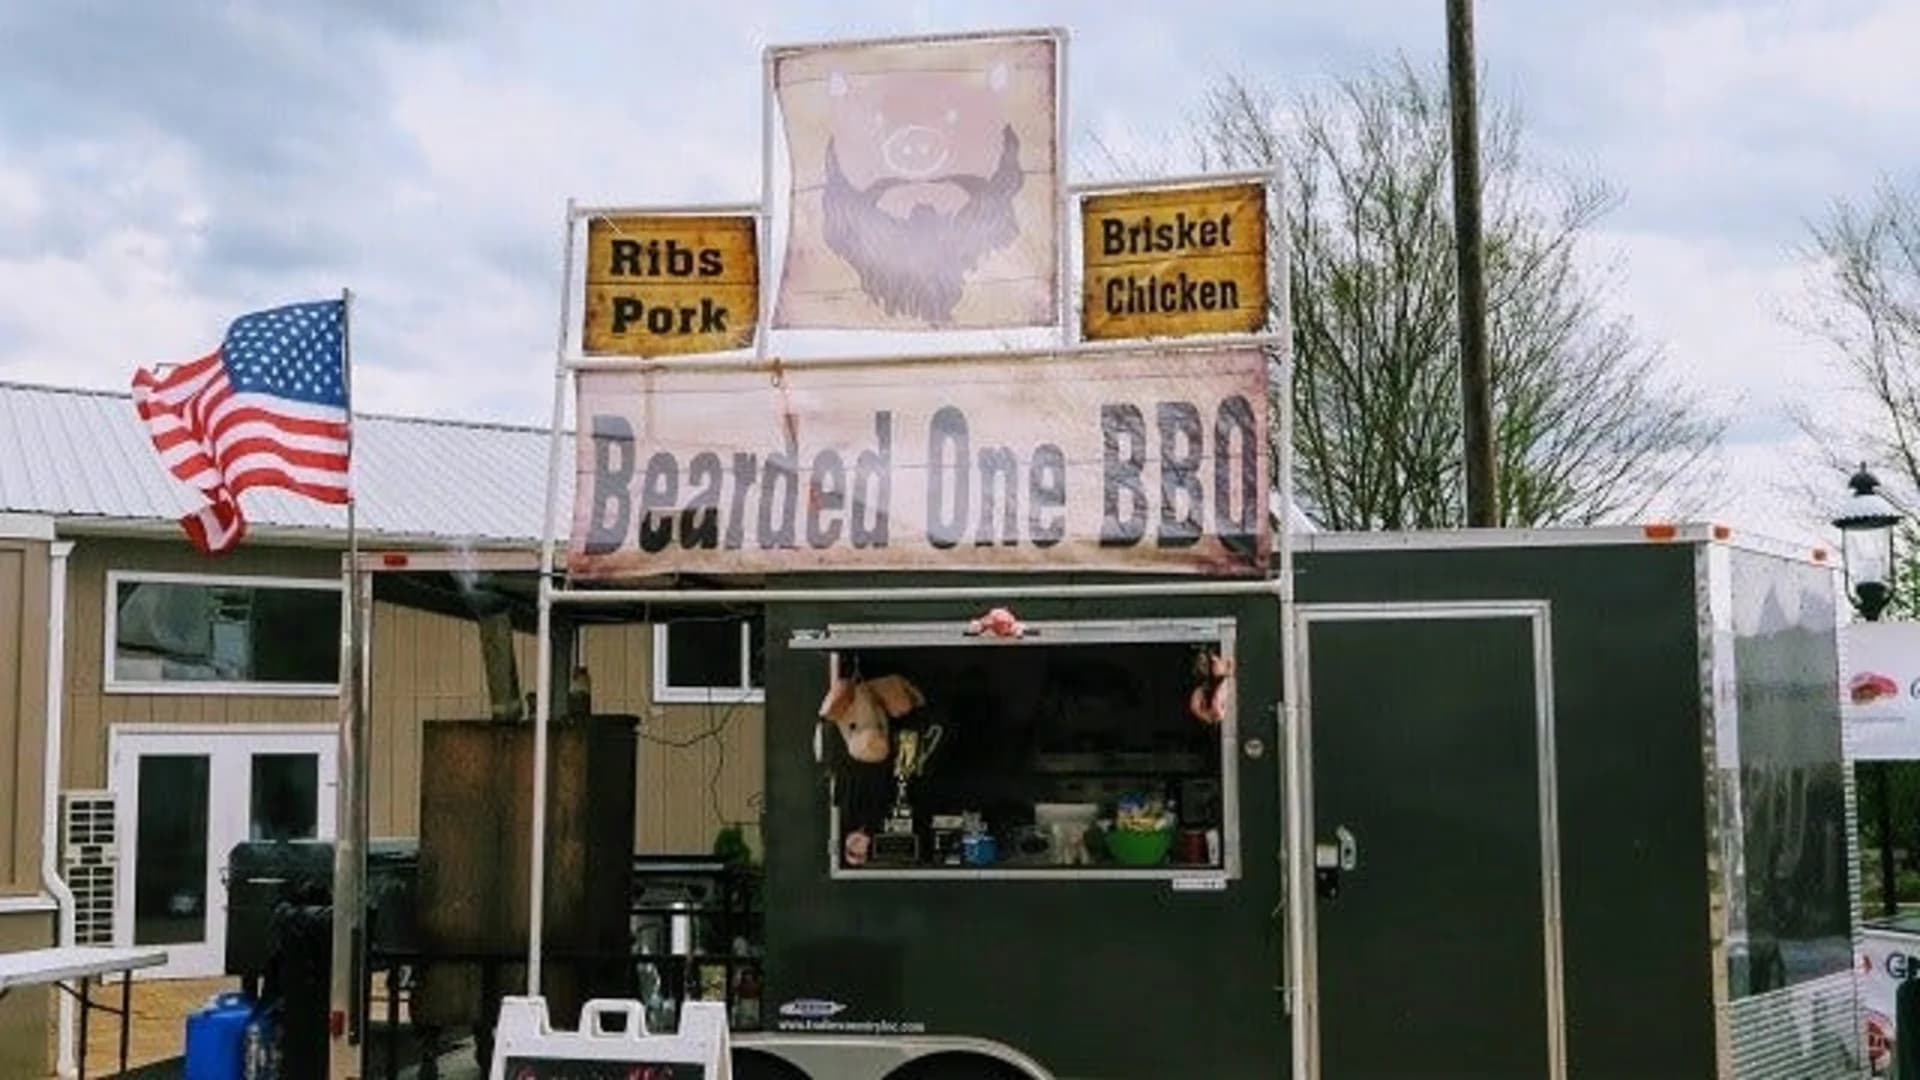 Food Truck Friday: The Bearded One BBQ